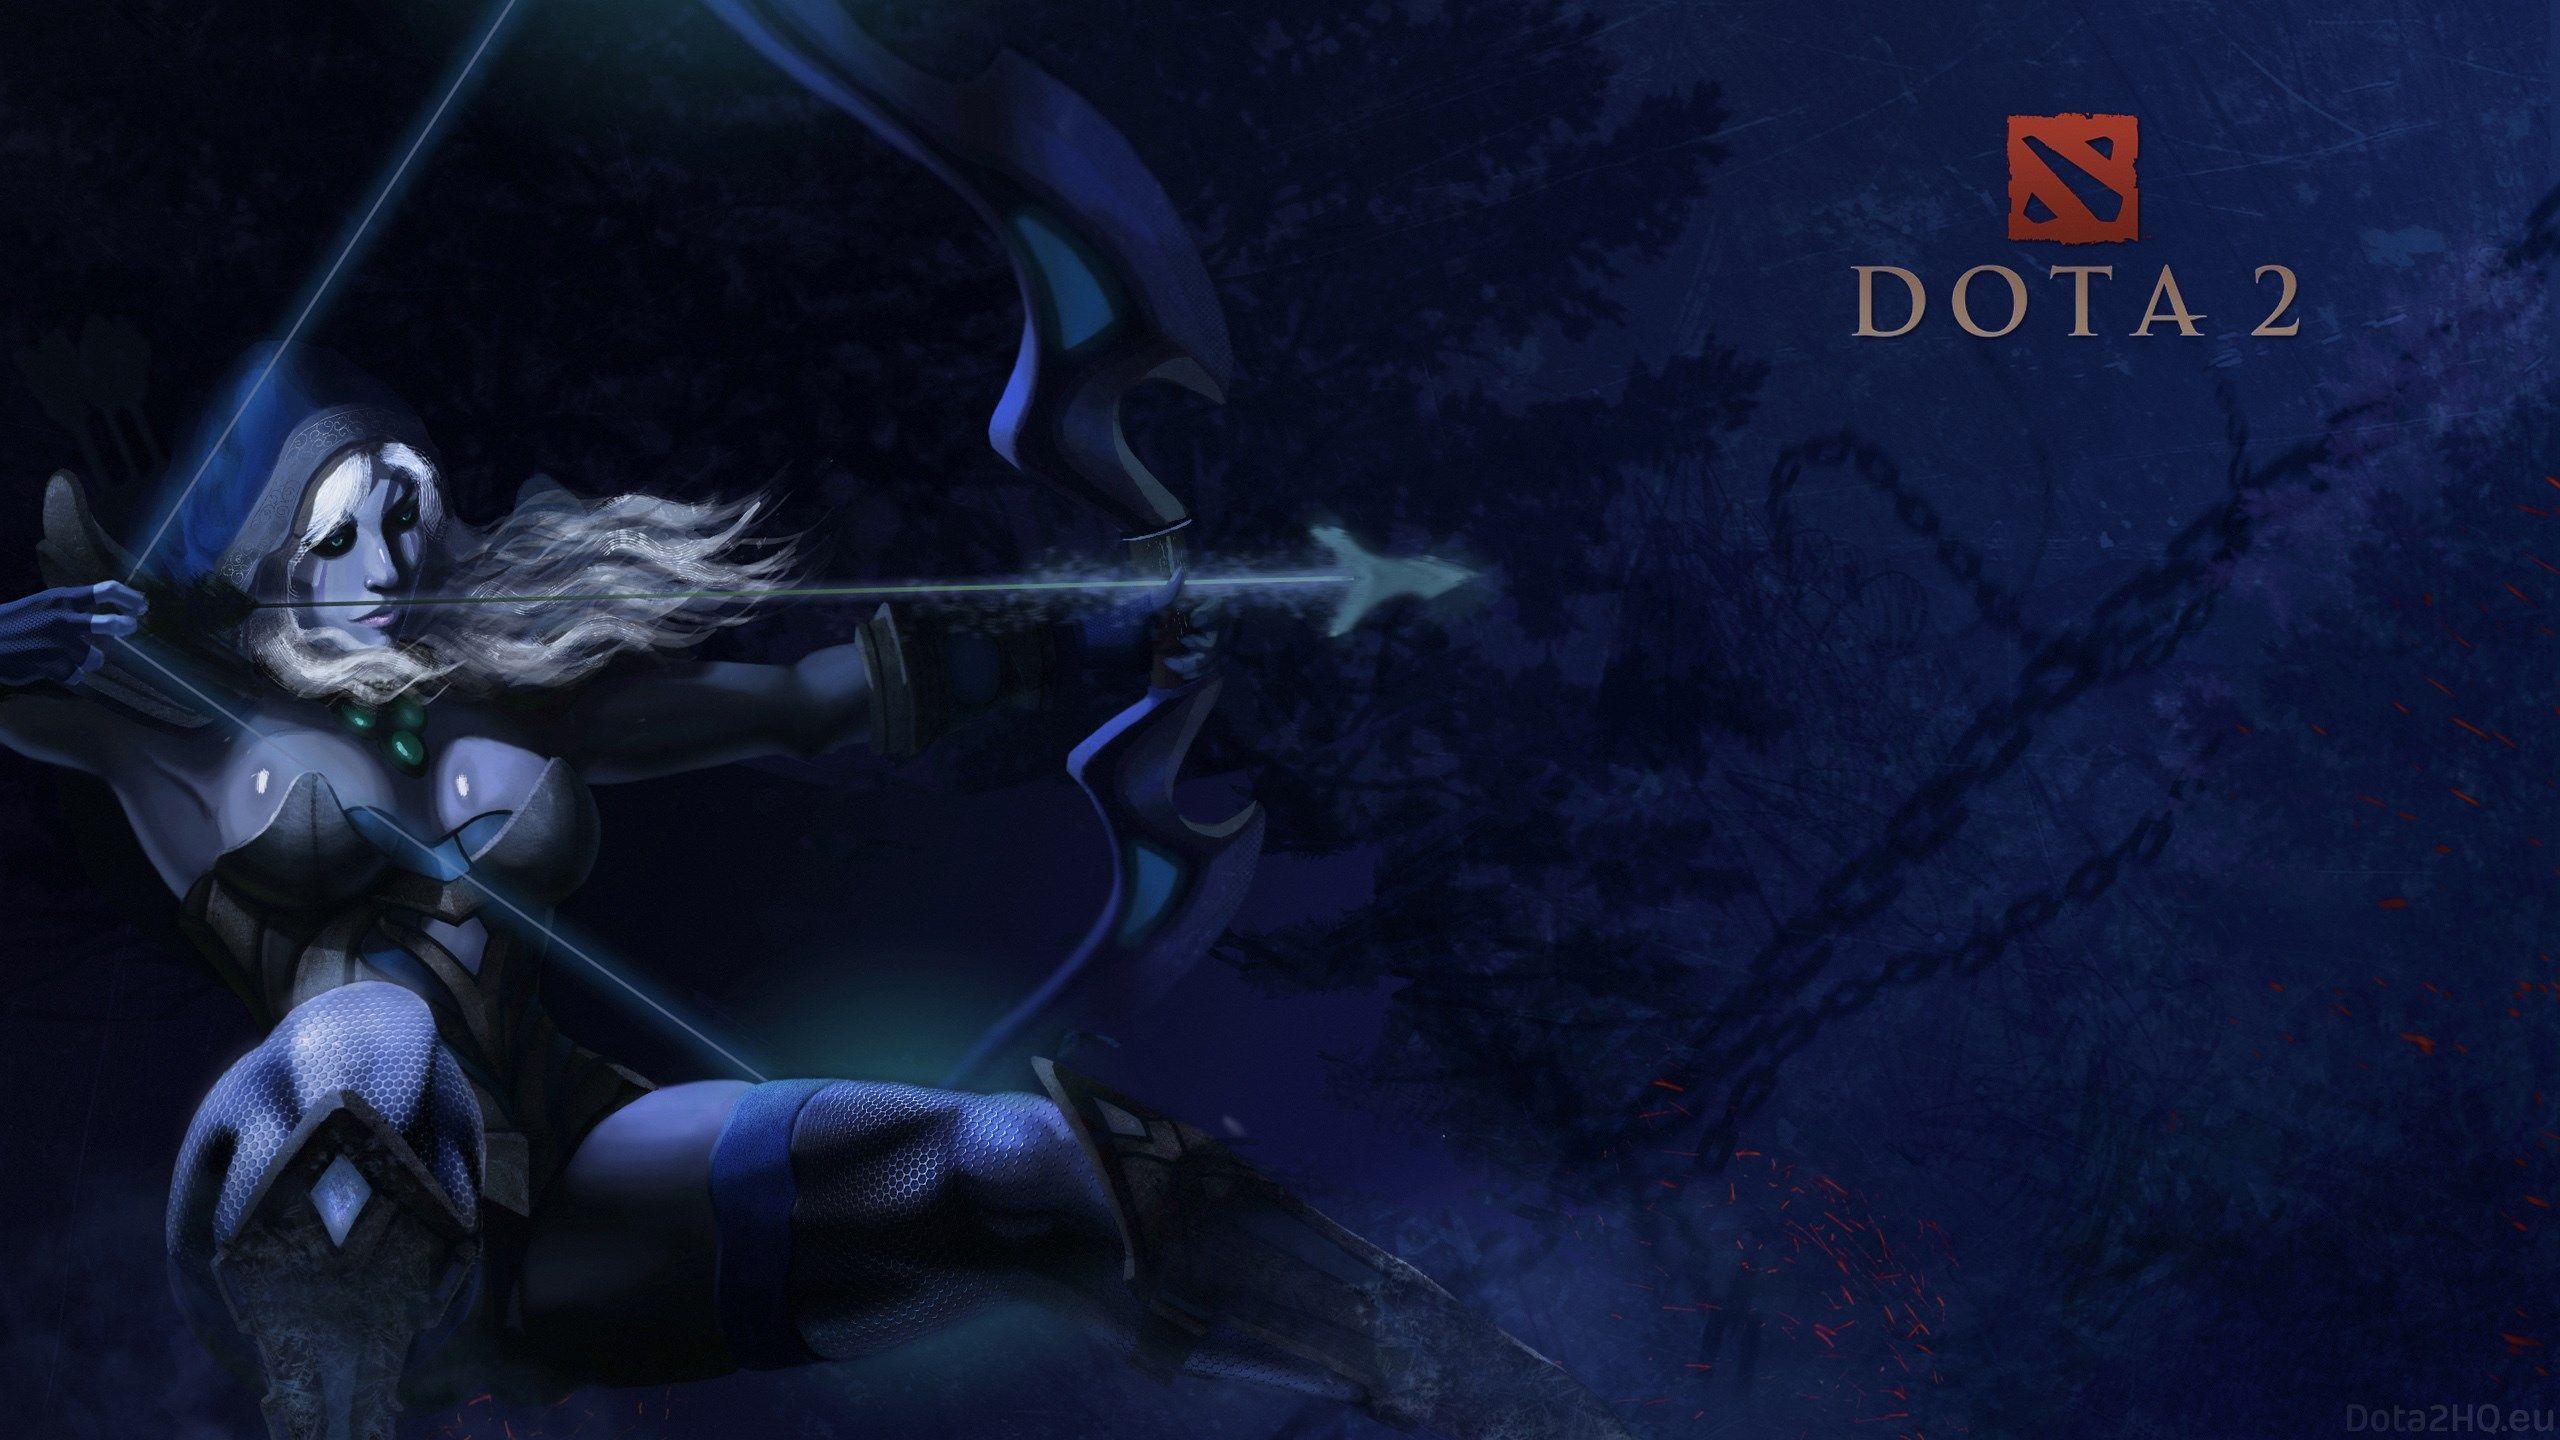 drow ranger #dota 2 image. wallpaper and backgronds